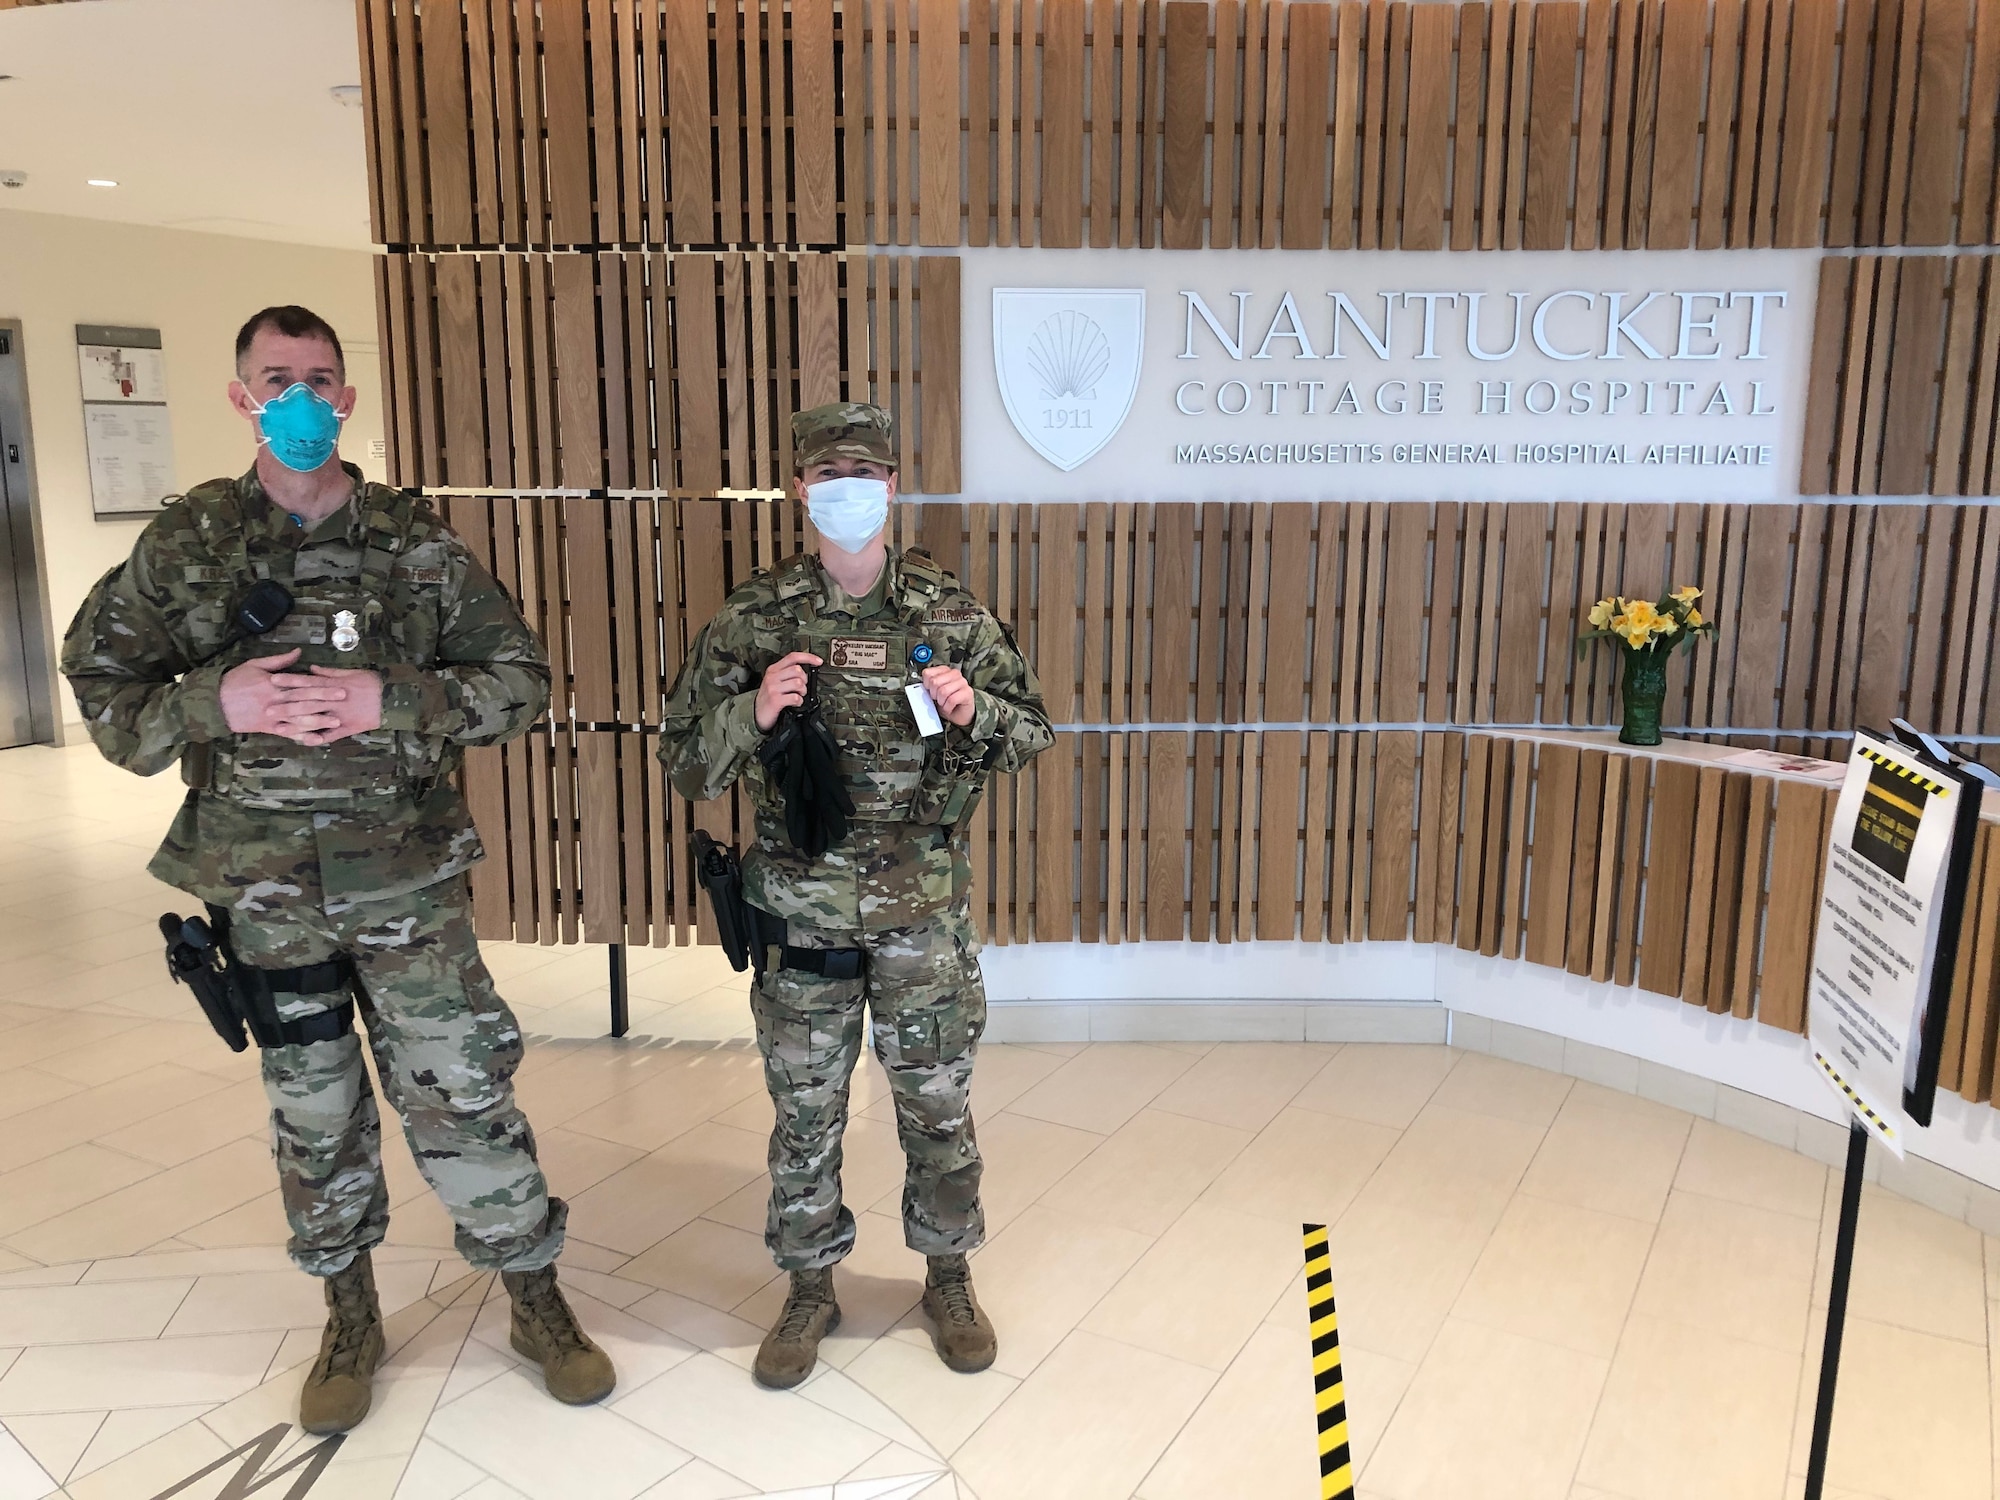 Two security forces defenders wearing face masks stand at the entrance to Nantucket Cottage Hospital